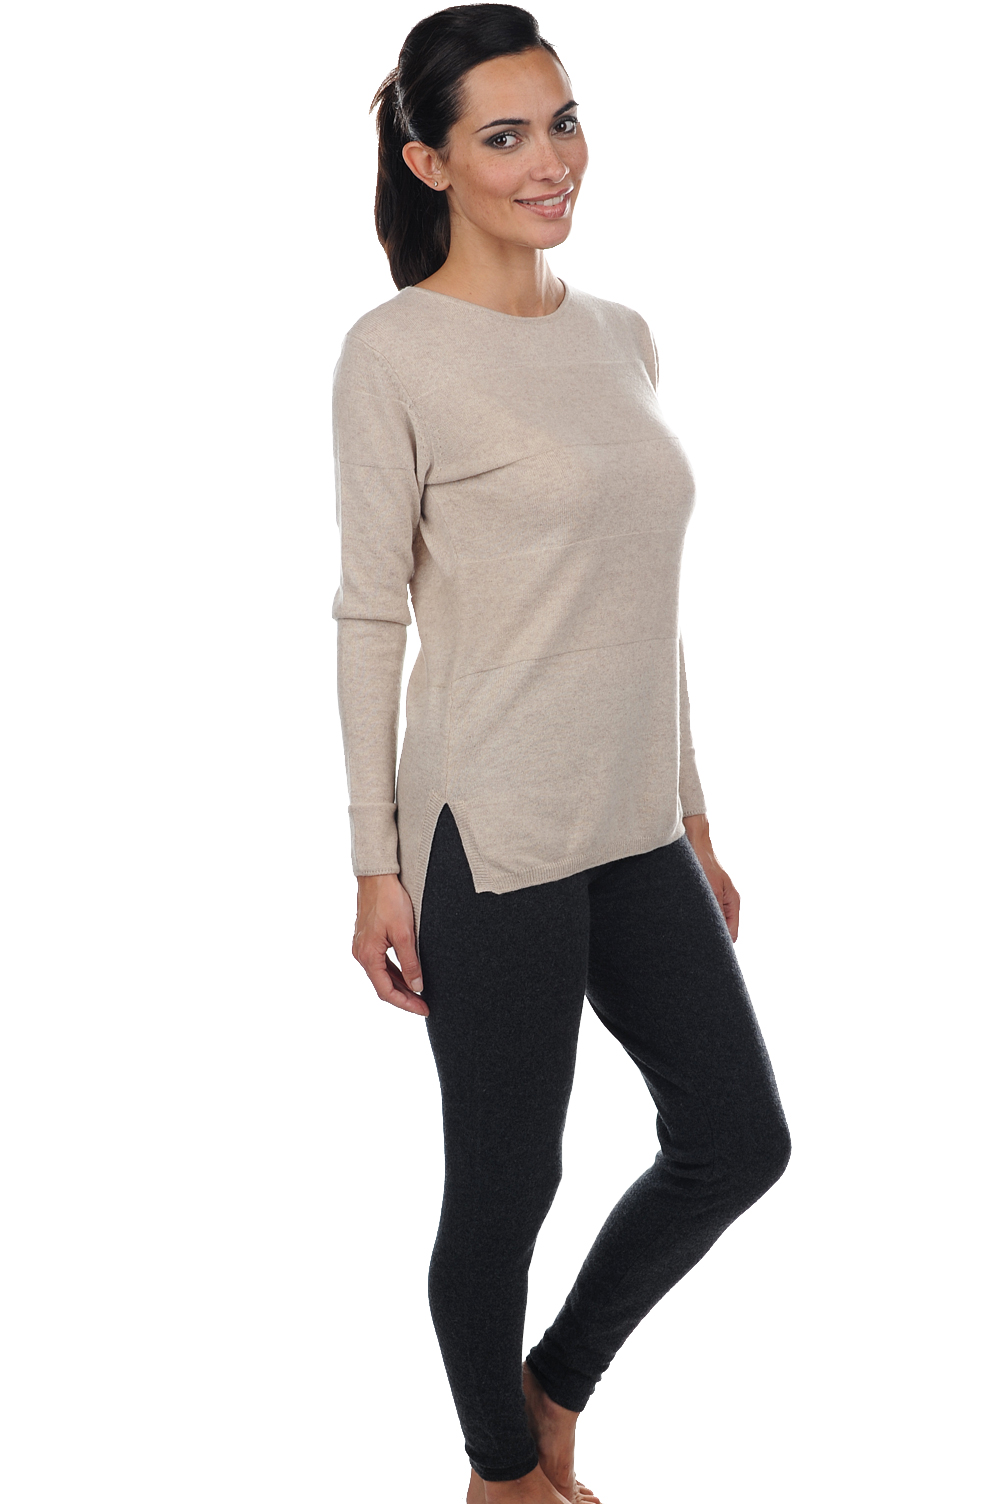 Cashmere ladies cocooning xelina charcoal marl 4xl